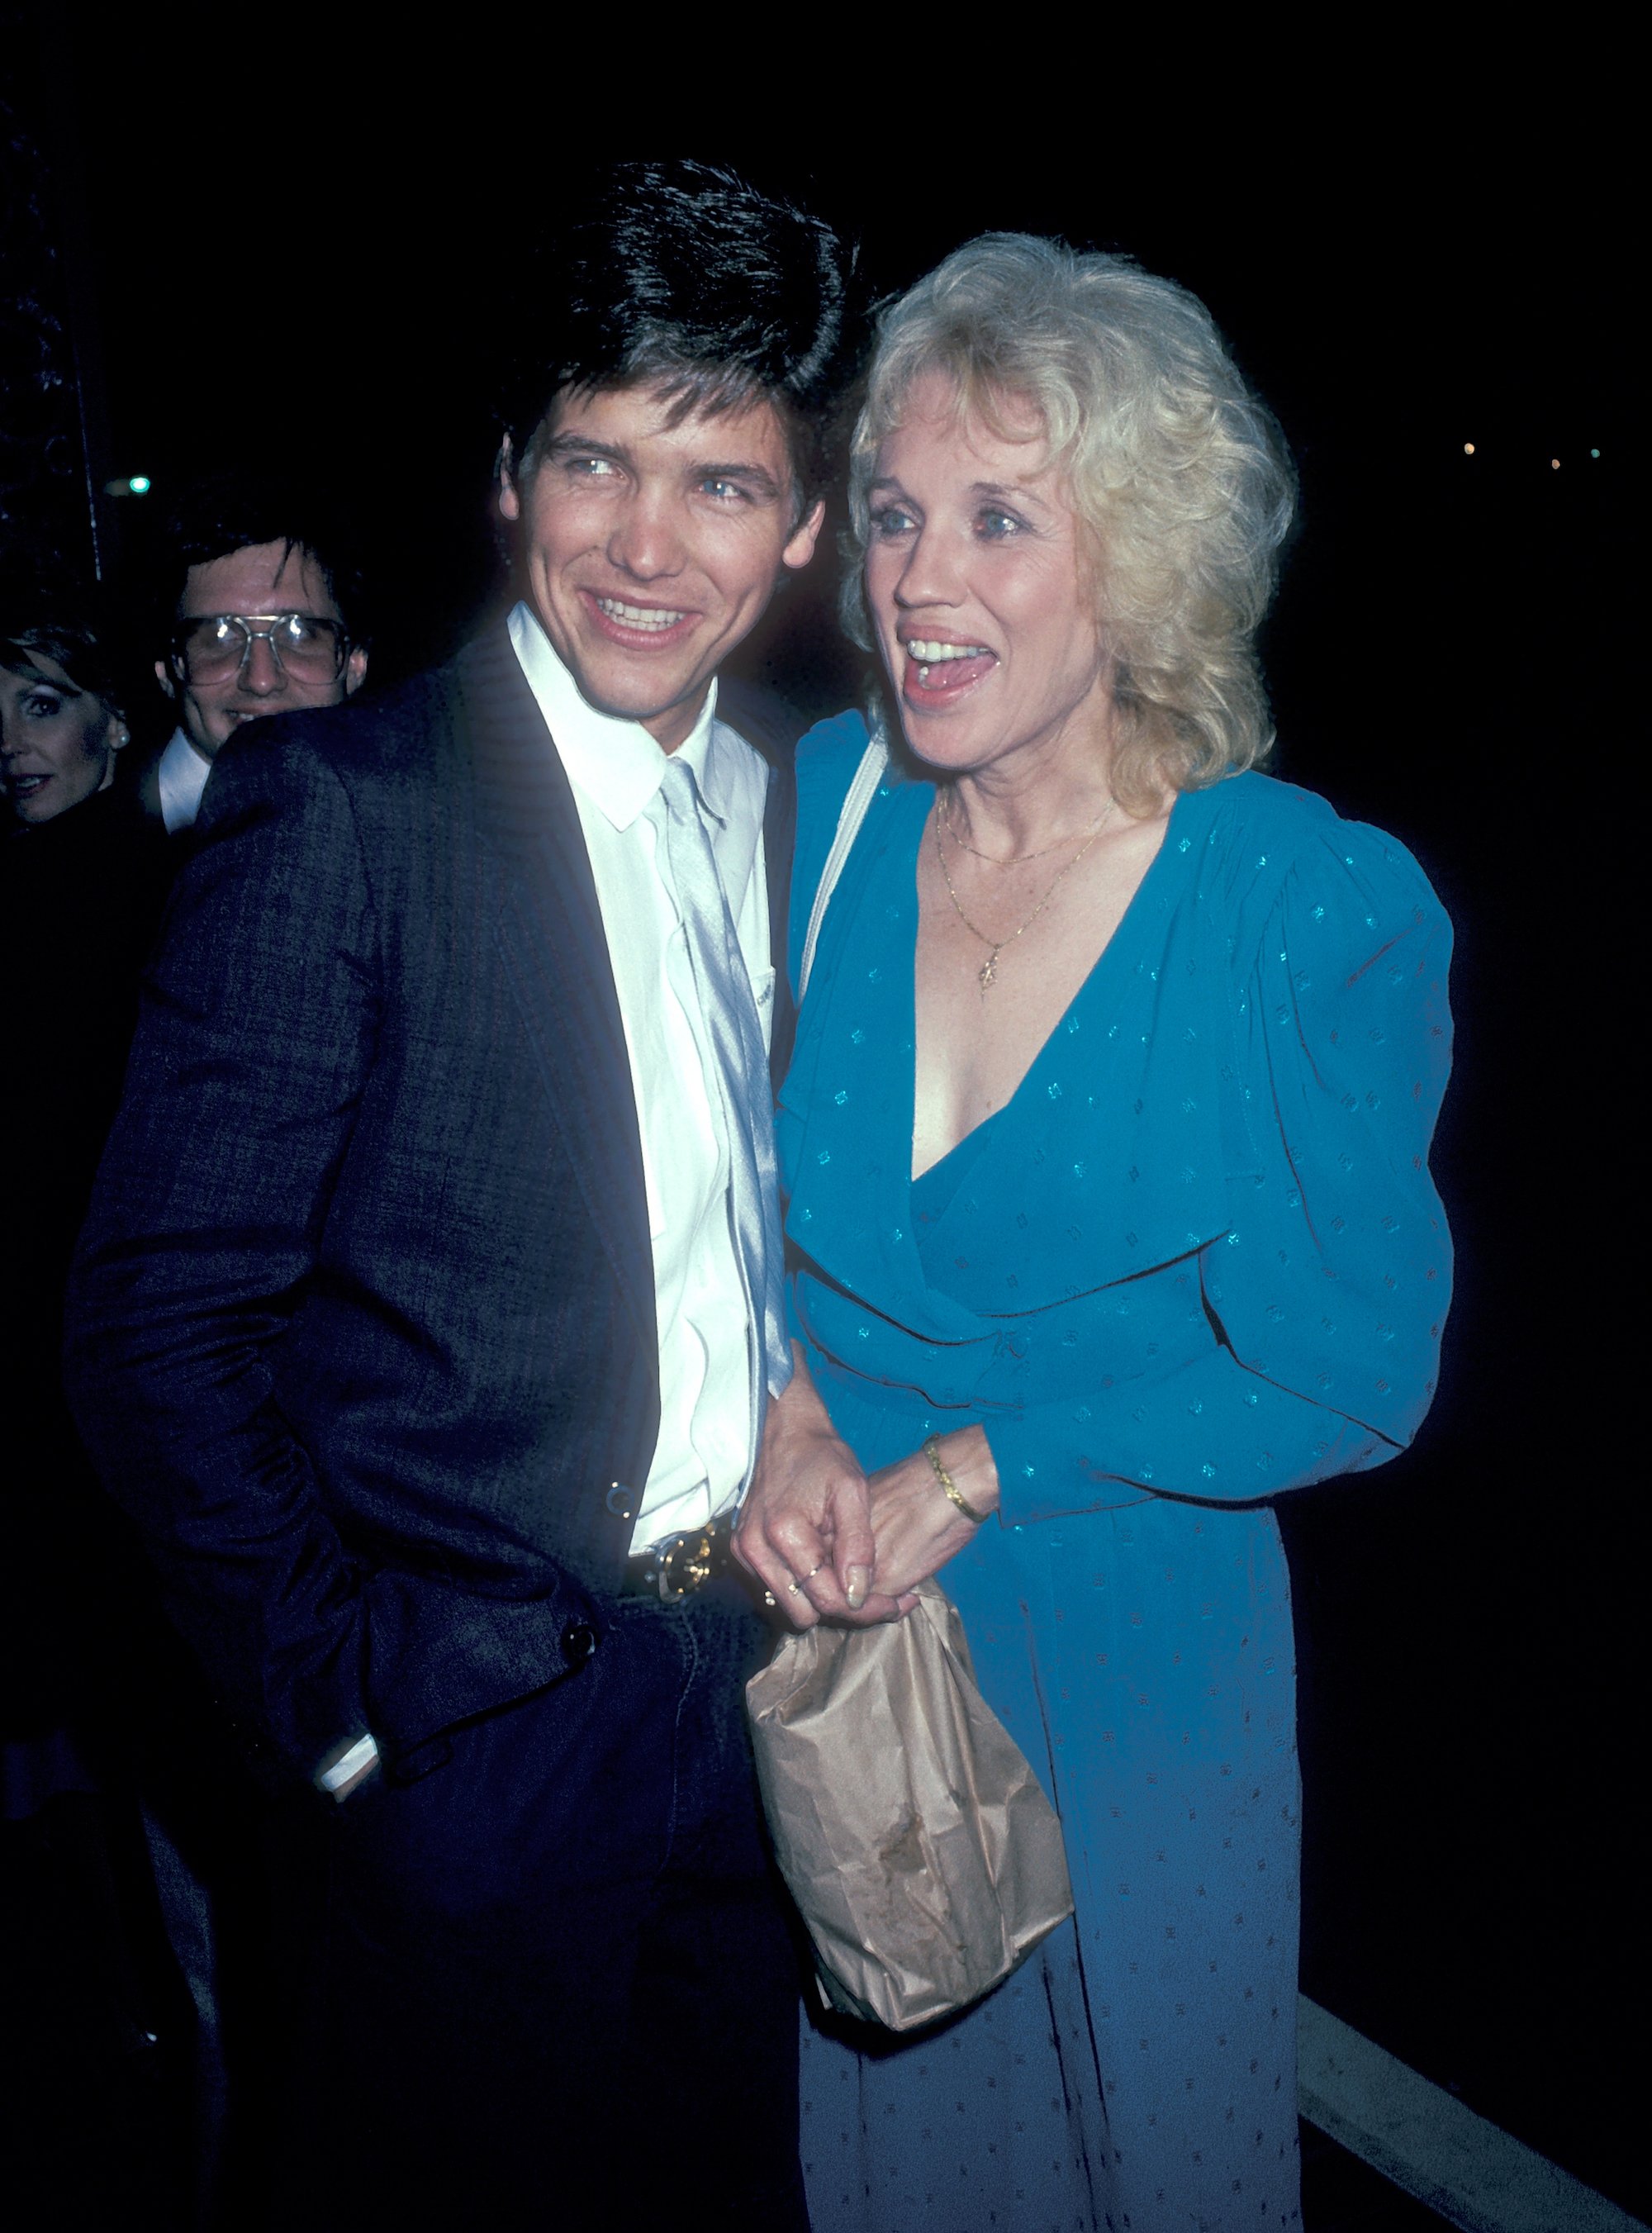 Michael Damian and Carolyn Conwell smiling looking away from the camera